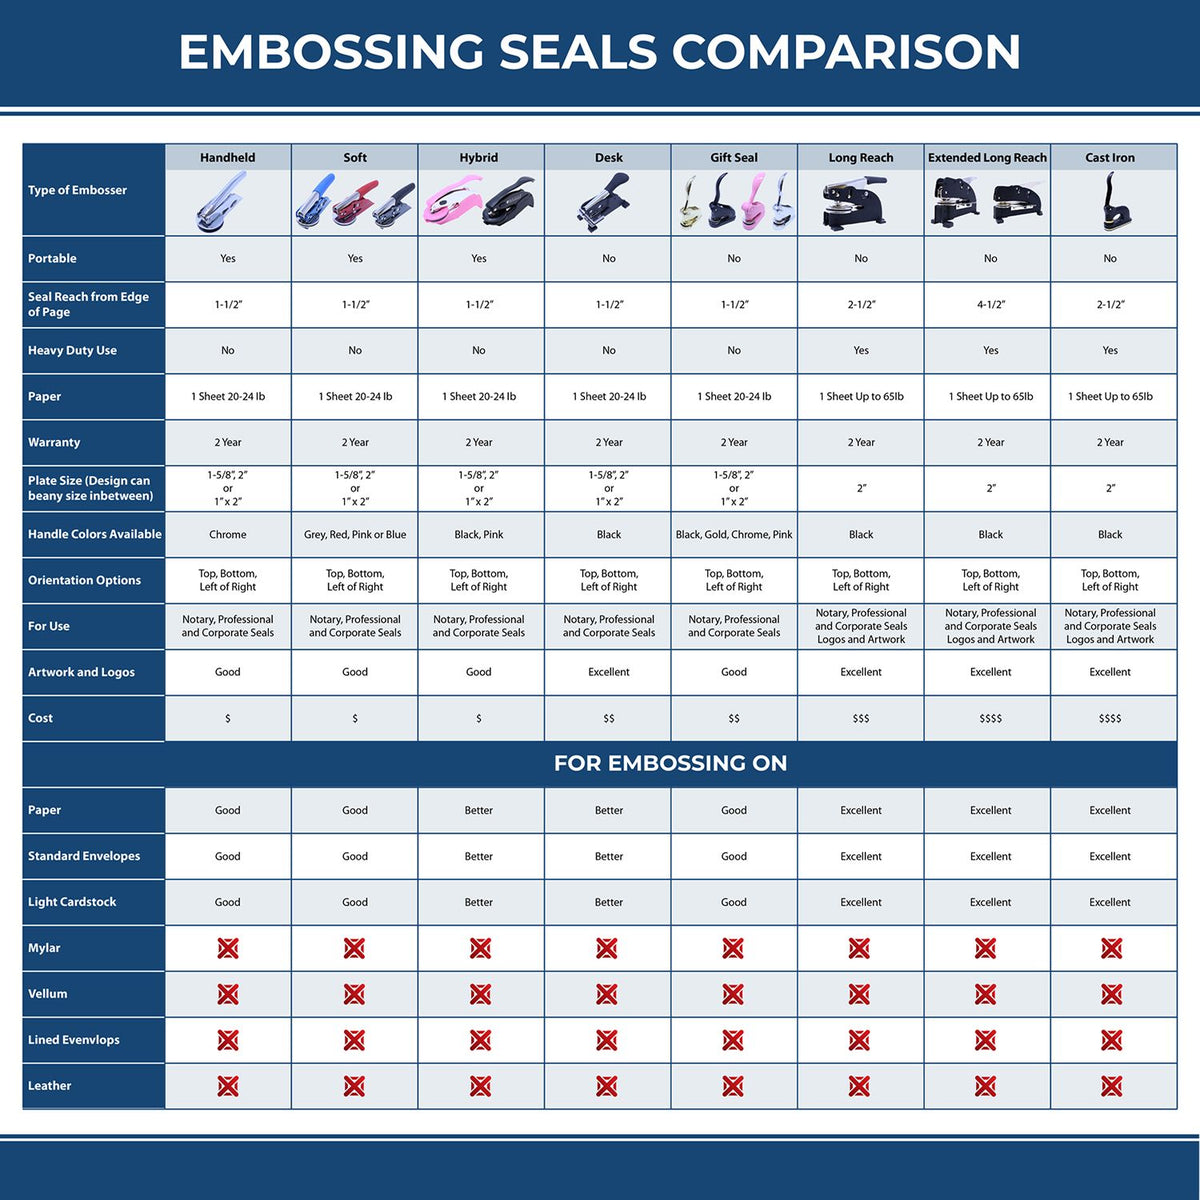 A comparison chart for the different types of mount models available for the Hybrid North Dakota Geologist Seal